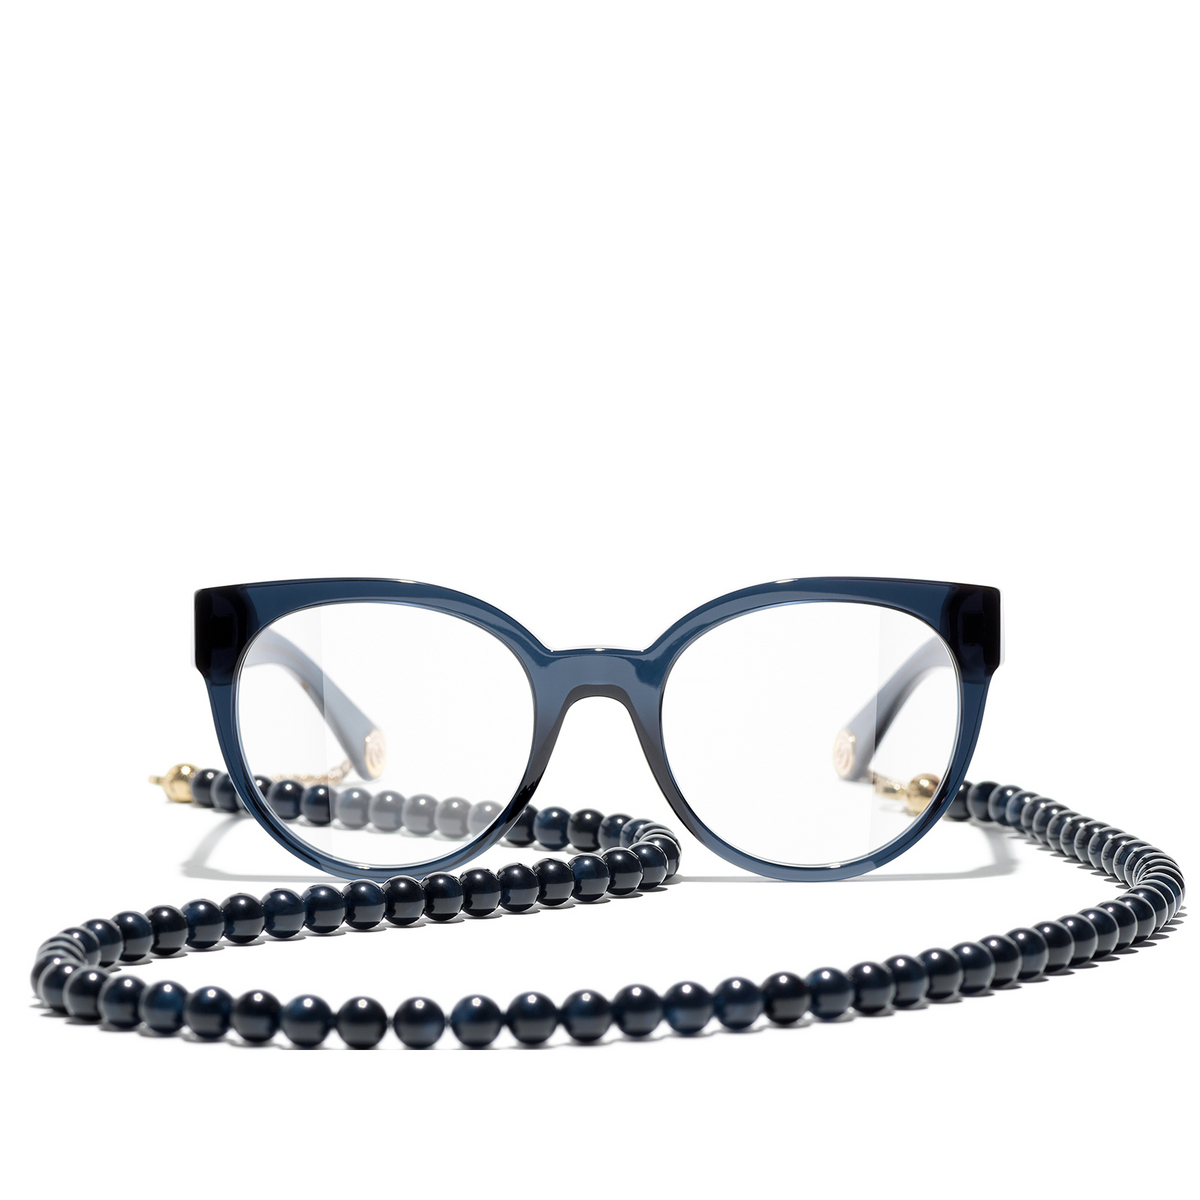 CHANEL butterfly Eyeglasses C503 Dark Blue & Gold - front view